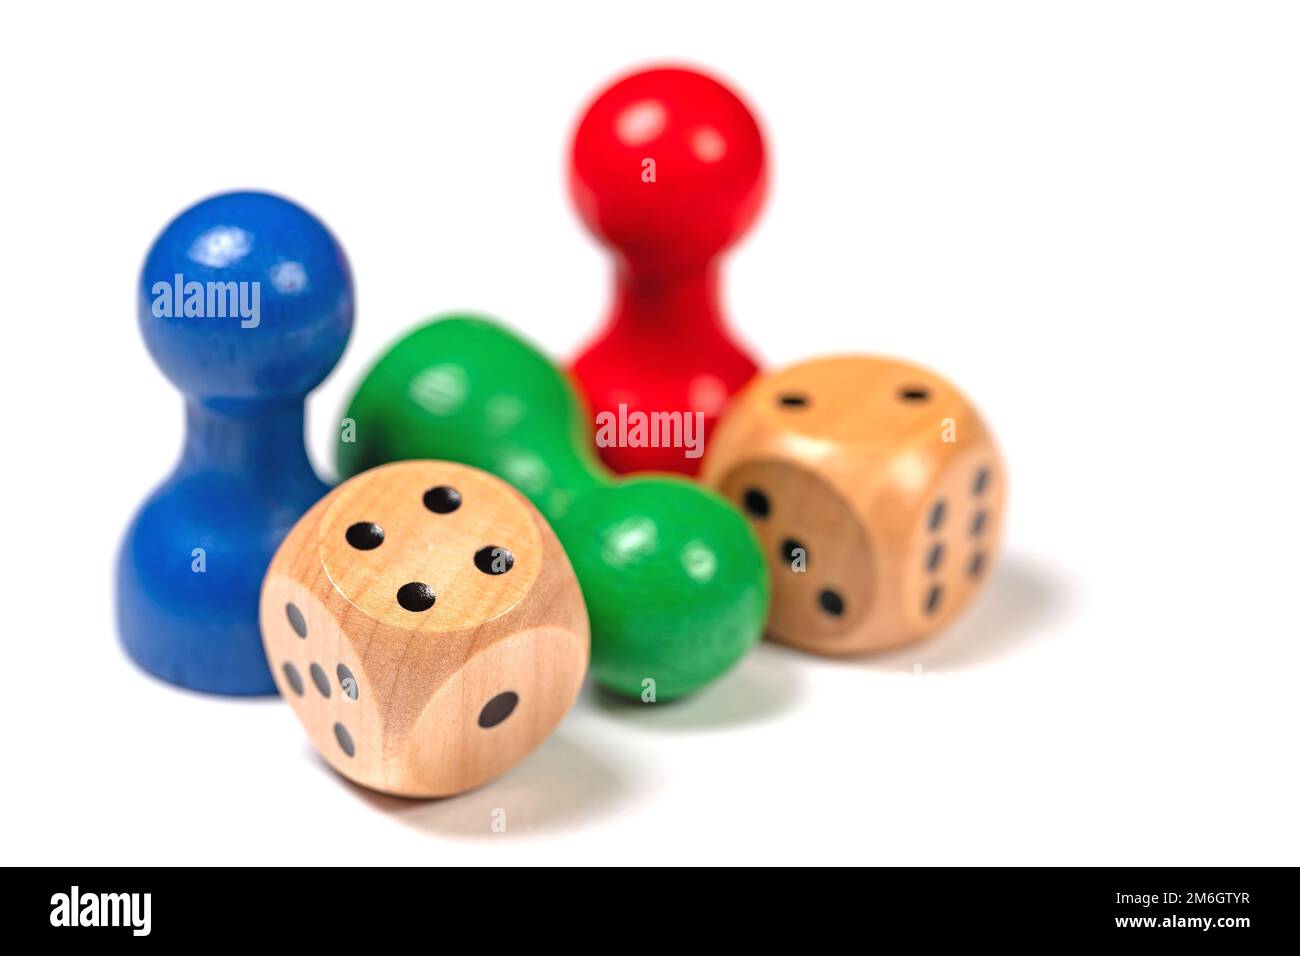 Colorful game pieces and dice close-up Stock Photo